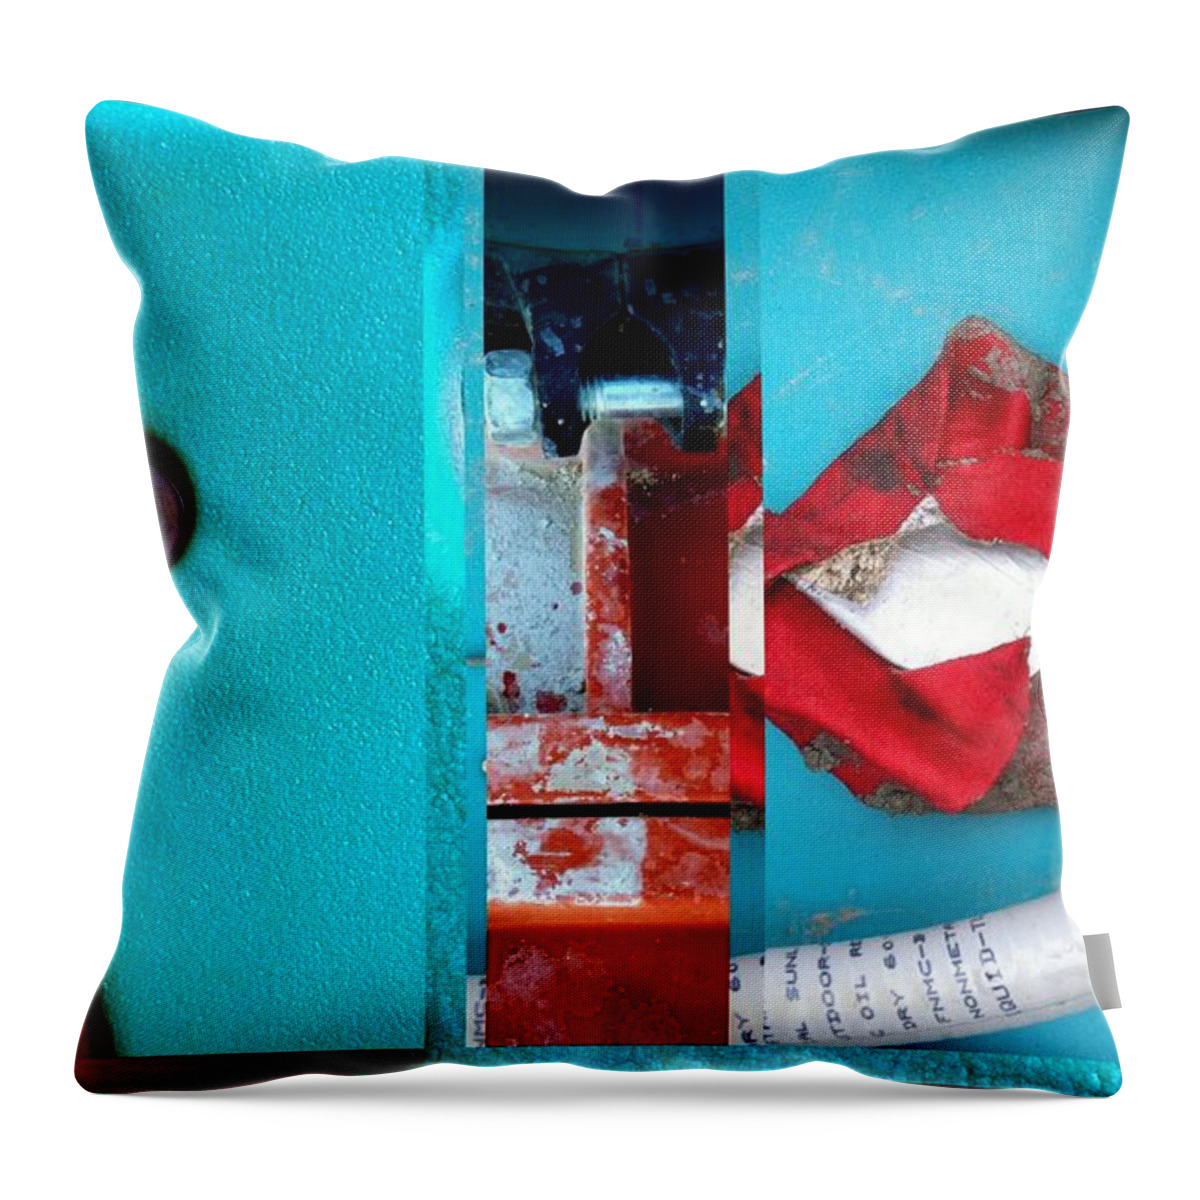 Urban Abstracts Throw Pillow featuring the photograph Urban Abstracts Seeing Double 28 by Marlene Burns